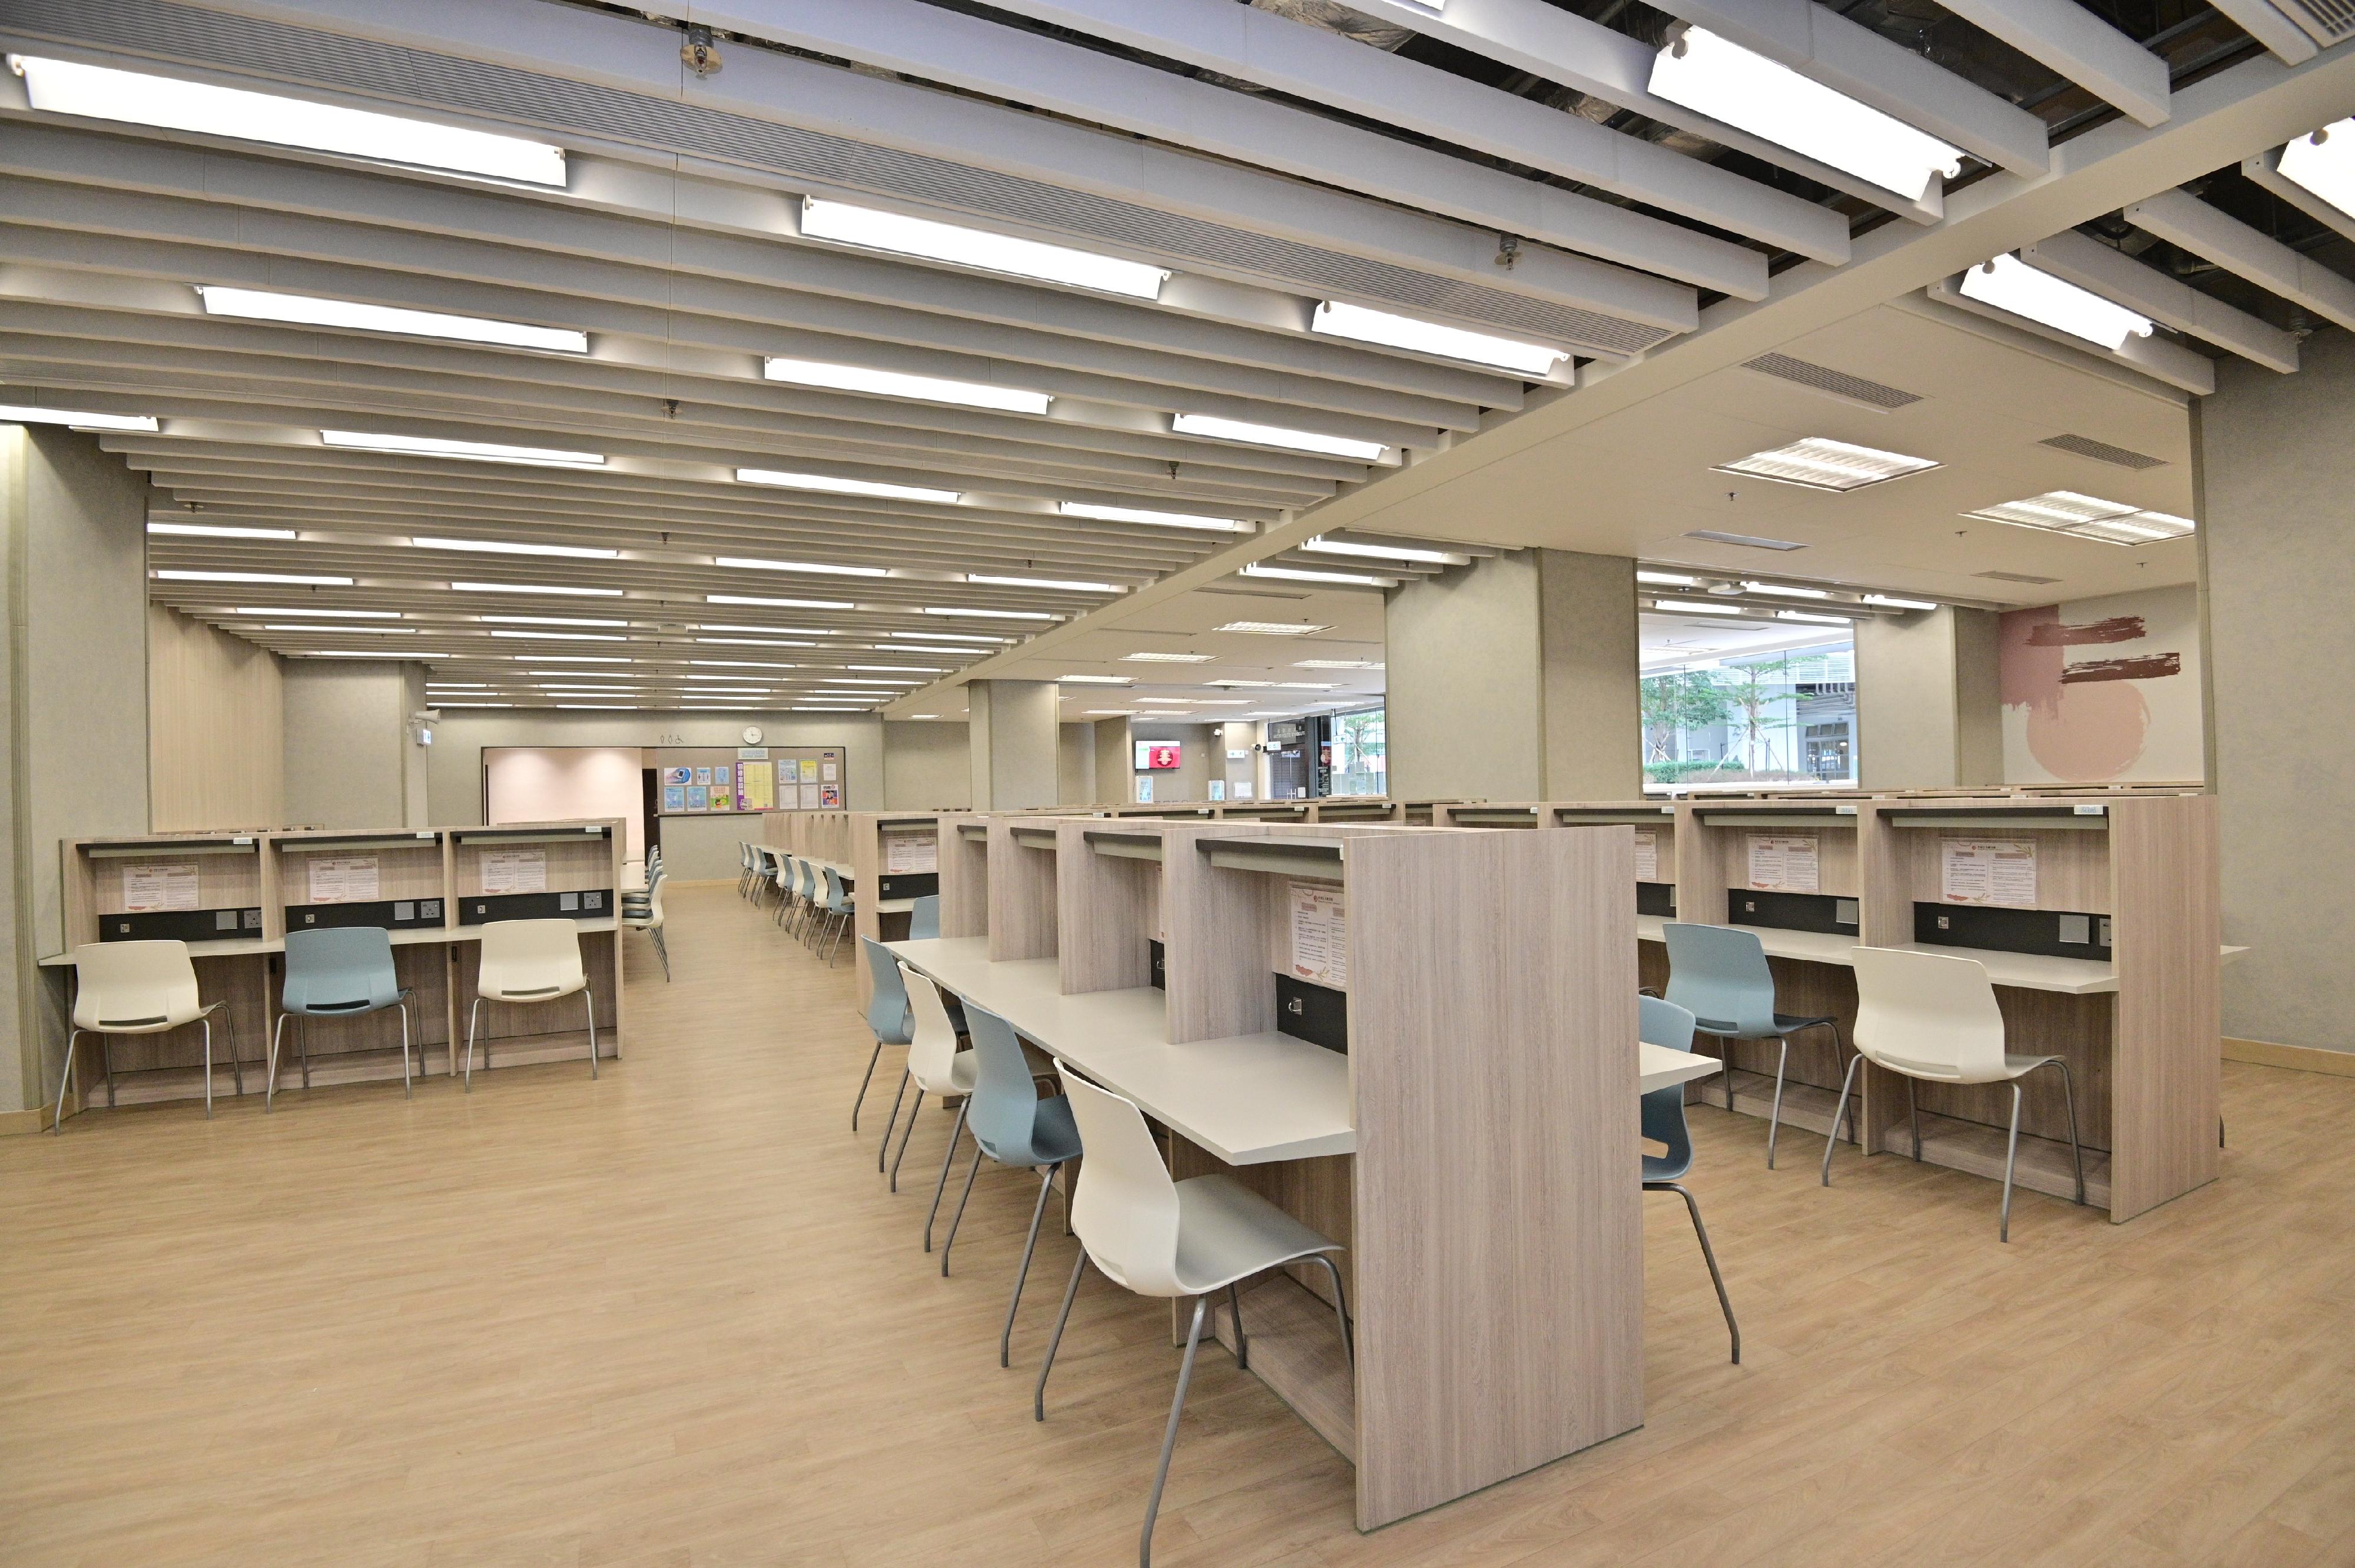 The Sham Shui Po Public Library, the fifth library in the district, is expected to commence services in the first quarter of next year. Its Students' Study Room will open first on October 31 (Monday) to provide students and residents in the district with a quiet and relaxing environment for studying and learning. The Students' Study Room of the Sham Shui Po Public Library spans 340 square metres and offers a total of 220 seats.